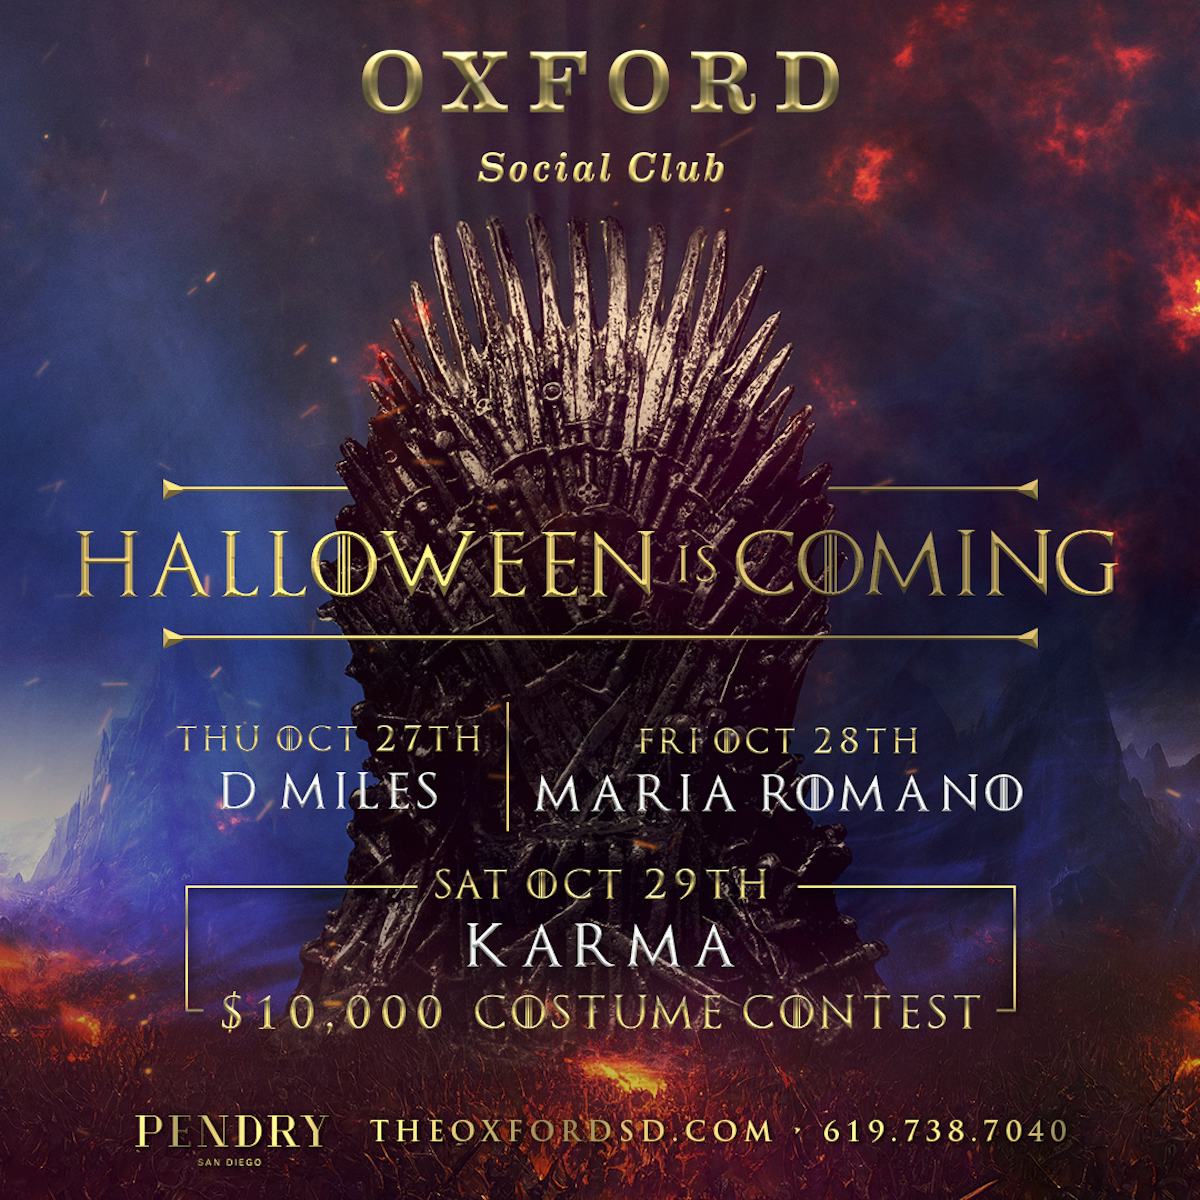 Tablelist | Buy Tickets and Tables to $10,000 Costume Contest w/ DJ Karma  at Oxford Social Club